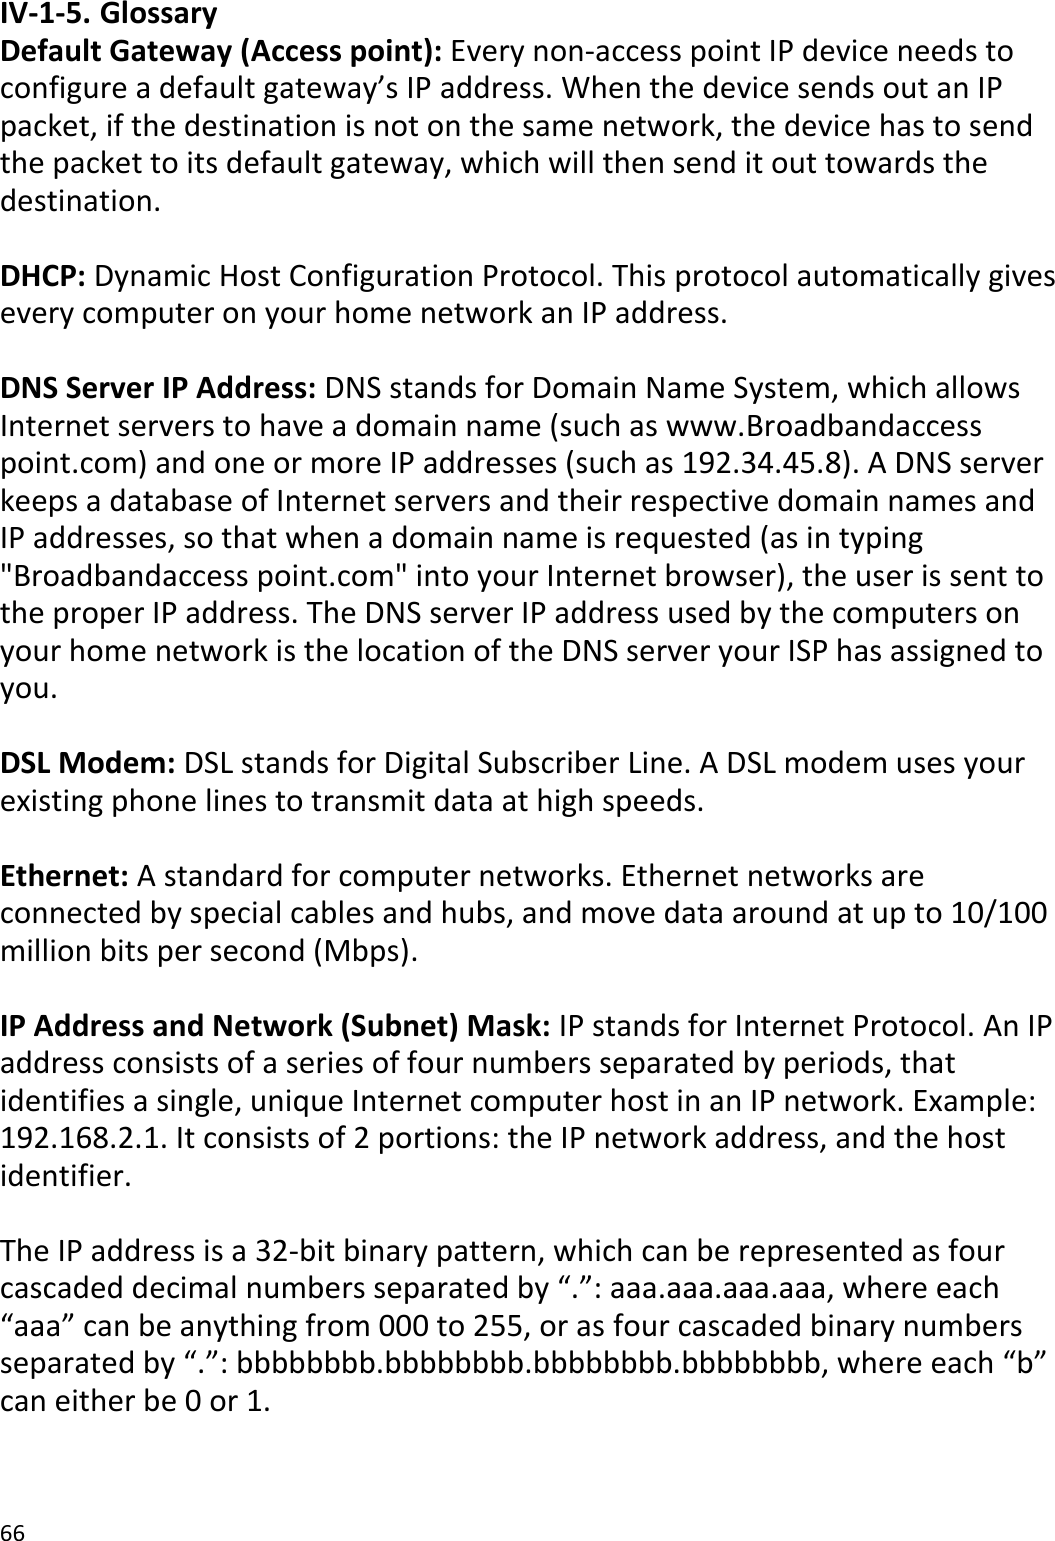 66  IV-1-5. Glossary Default Gateway (Access point): Every non-access point IP device needs to configure a default gateway’s IP address. When the device sends out an IP packet, if the destination is not on the same network, the device has to send the packet to its default gateway, which will then send it out towards the destination.  DHCP: Dynamic Host Configuration Protocol. This protocol automatically gives every computer on your home network an IP address.  DNS Server IP Address: DNS stands for Domain Name System, which allows Internet servers to have a domain name (such as www.Broadbandaccess point.com) and one or more IP addresses (such as 192.34.45.8). A DNS server keeps a database of Internet servers and their respective domain names and IP addresses, so that when a domain name is requested (as in typing &quot;Broadbandaccess point.com&quot; into your Internet browser), the user is sent to the proper IP address. The DNS server IP address used by the computers on your home network is the location of the DNS server your ISP has assigned to you.   DSL Modem: DSL stands for Digital Subscriber Line. A DSL modem uses your existing phone lines to transmit data at high speeds.   Ethernet: A standard for computer networks. Ethernet networks are connected by special cables and hubs, and move data around at up to 10/100 million bits per second (Mbps).  IP Address and Network (Subnet) Mask: IP stands for Internet Protocol. An IP address consists of a series of four numbers separated by periods, that identifies a single, unique Internet computer host in an IP network. Example: 192.168.2.1. It consists of 2 portions: the IP network address, and the host identifier.  The IP address is a 32-bit binary pattern, which can be represented as four cascaded decimal numbers separated by “.”: aaa.aaa.aaa.aaa, where each “aaa” can be anything from 000 to 255, or as four cascaded binary numbers separated by “.”: bbbbbbbb.bbbbbbbb.bbbbbbbb.bbbbbbbb, where each “b” can either be 0 or 1.  